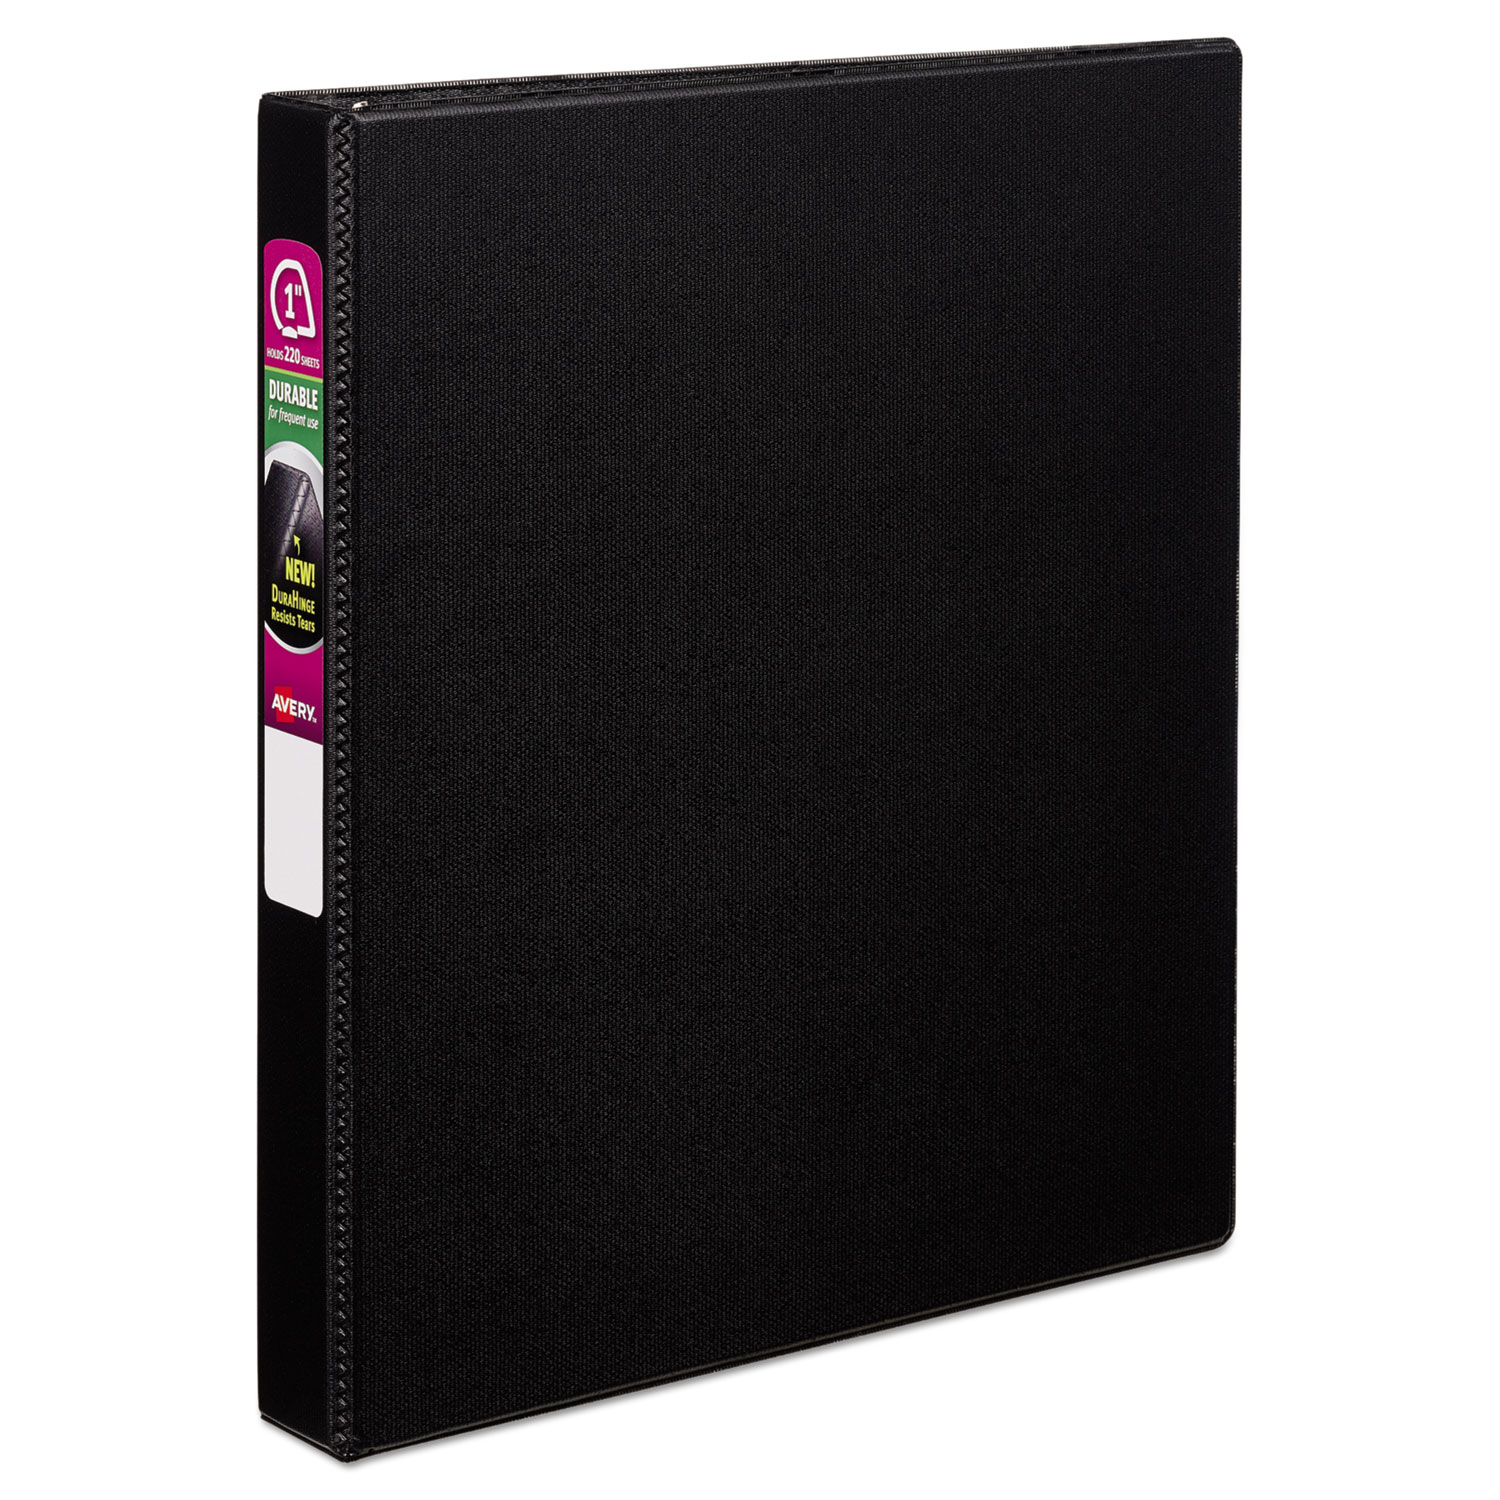  Avery 27250 Durable Non-View Binder with DuraHinge and Slant Rings, 3 Rings, 1 Capacity, 11 x 8.5, Black (AVE27250) 